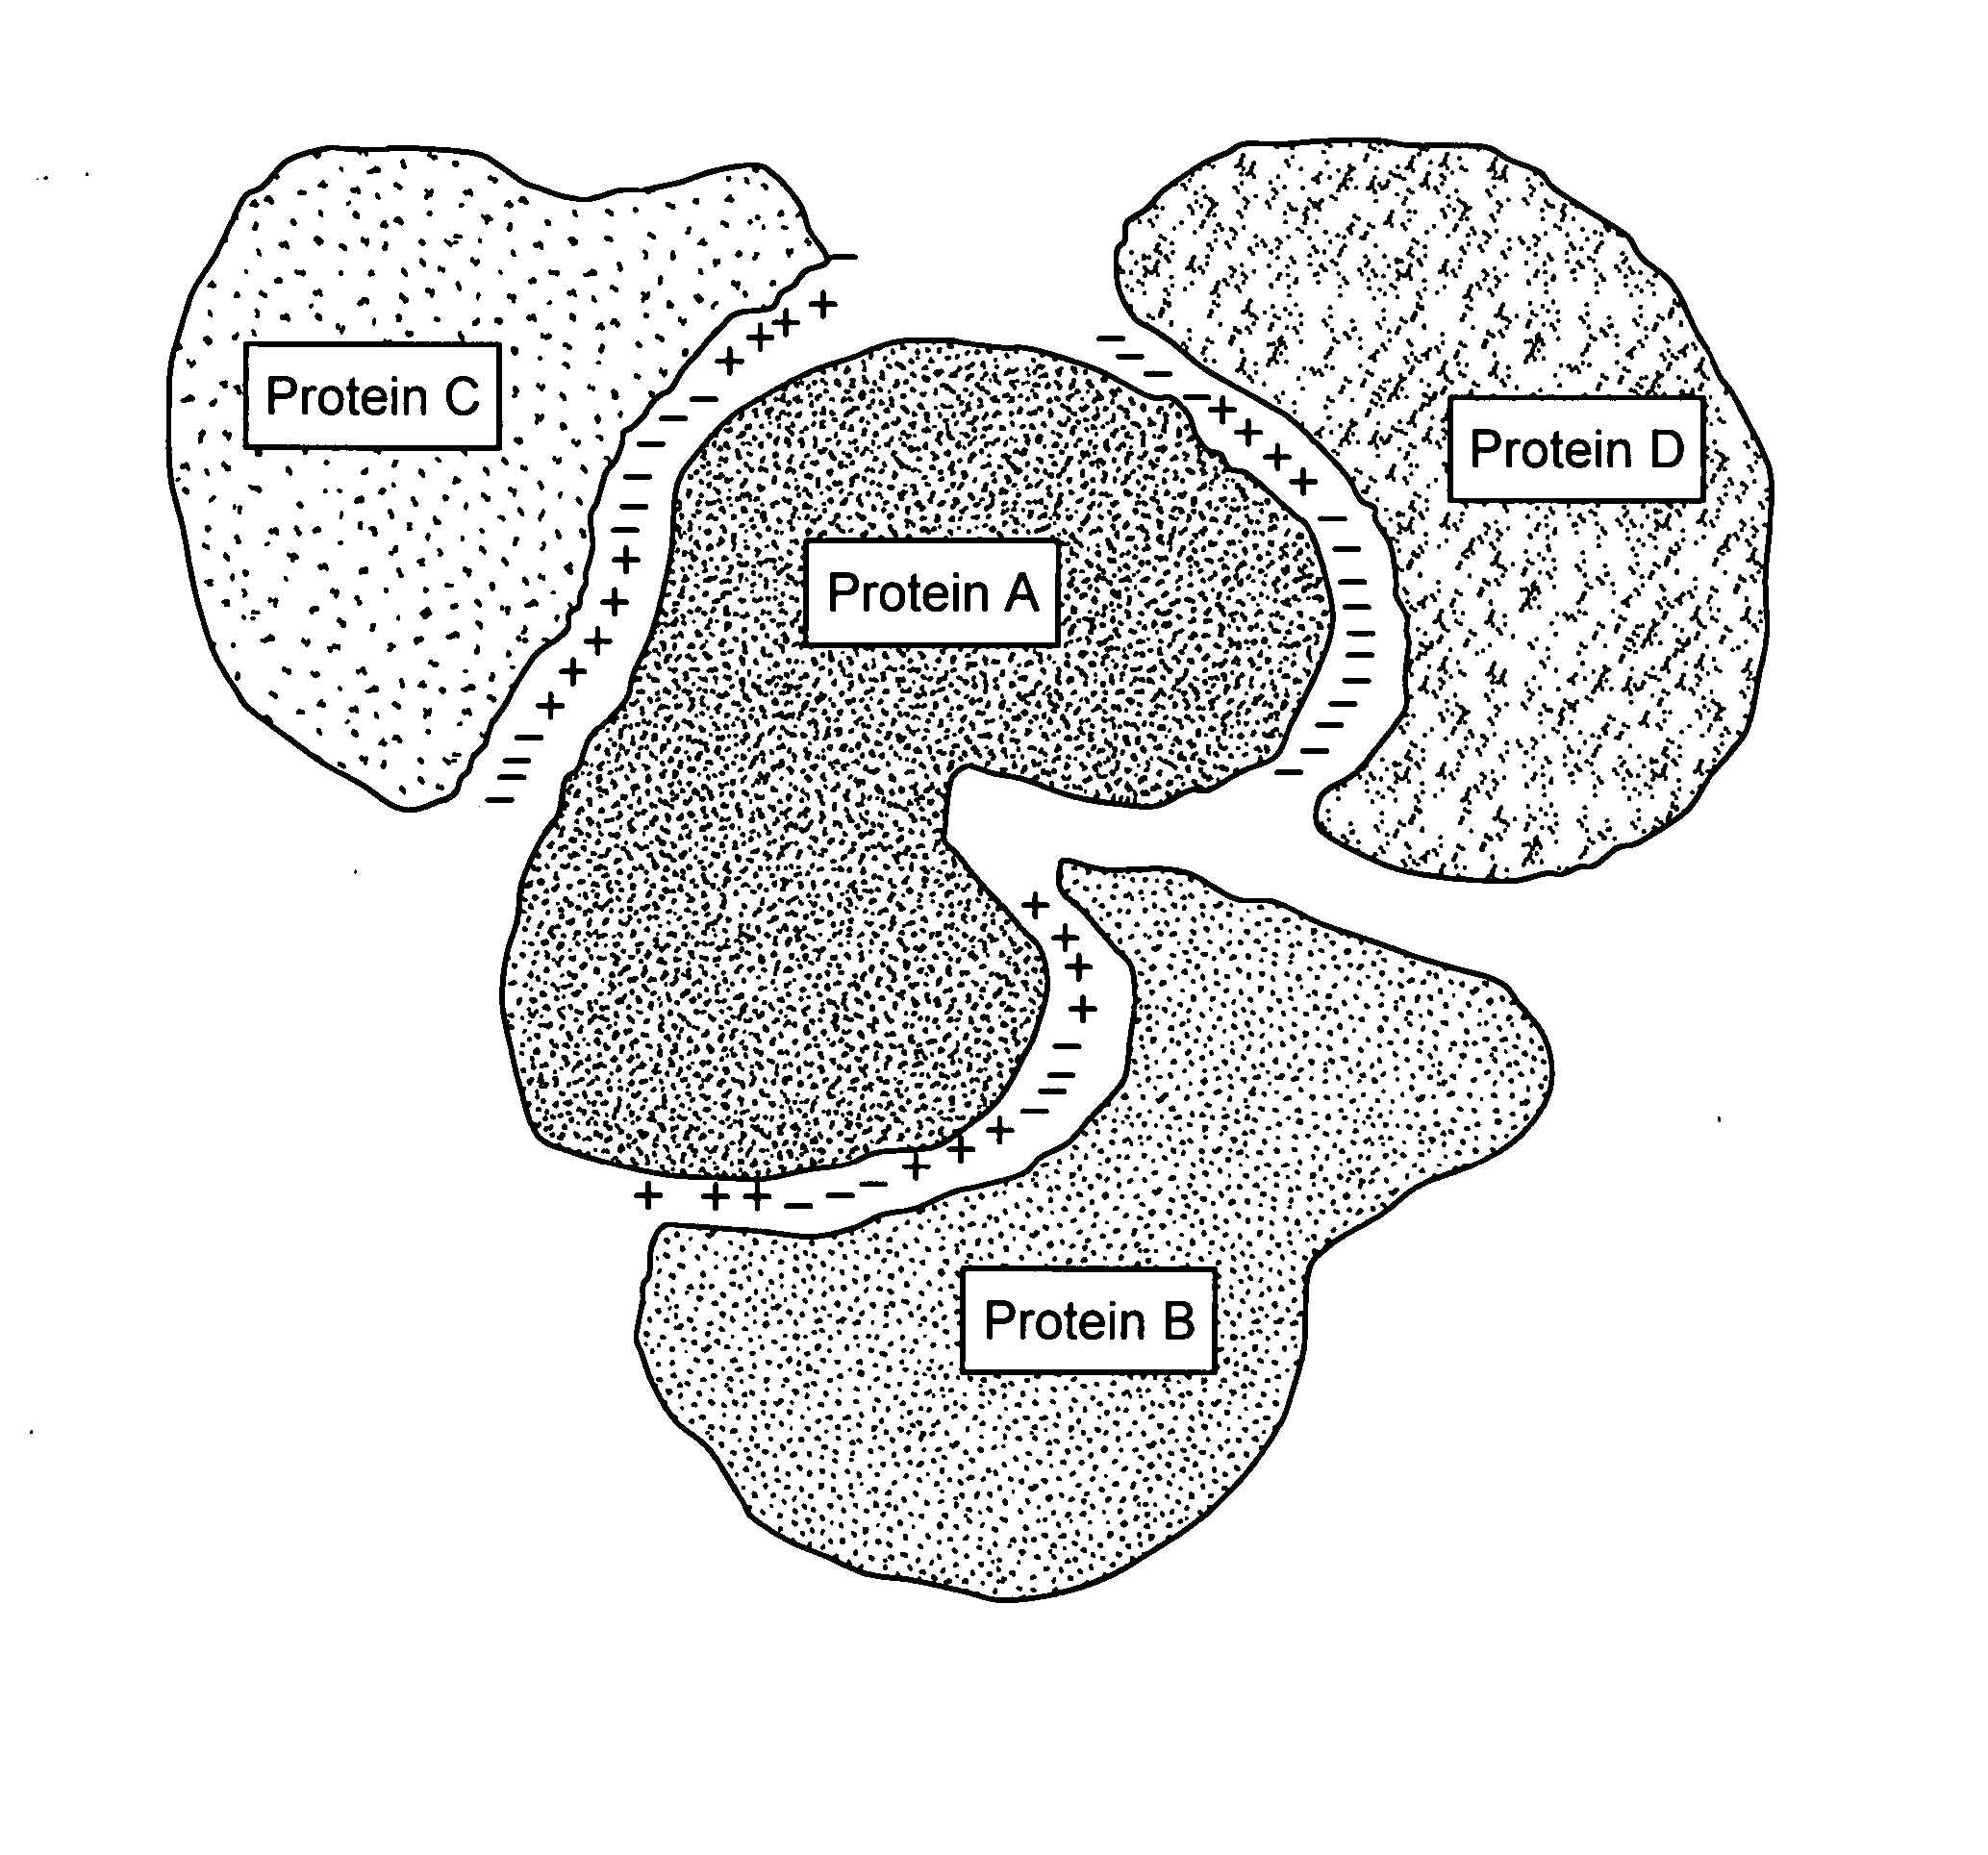 Protein-protein interactions and methods for identifying interacting proteins and the amino acid sequence at the site of interaction